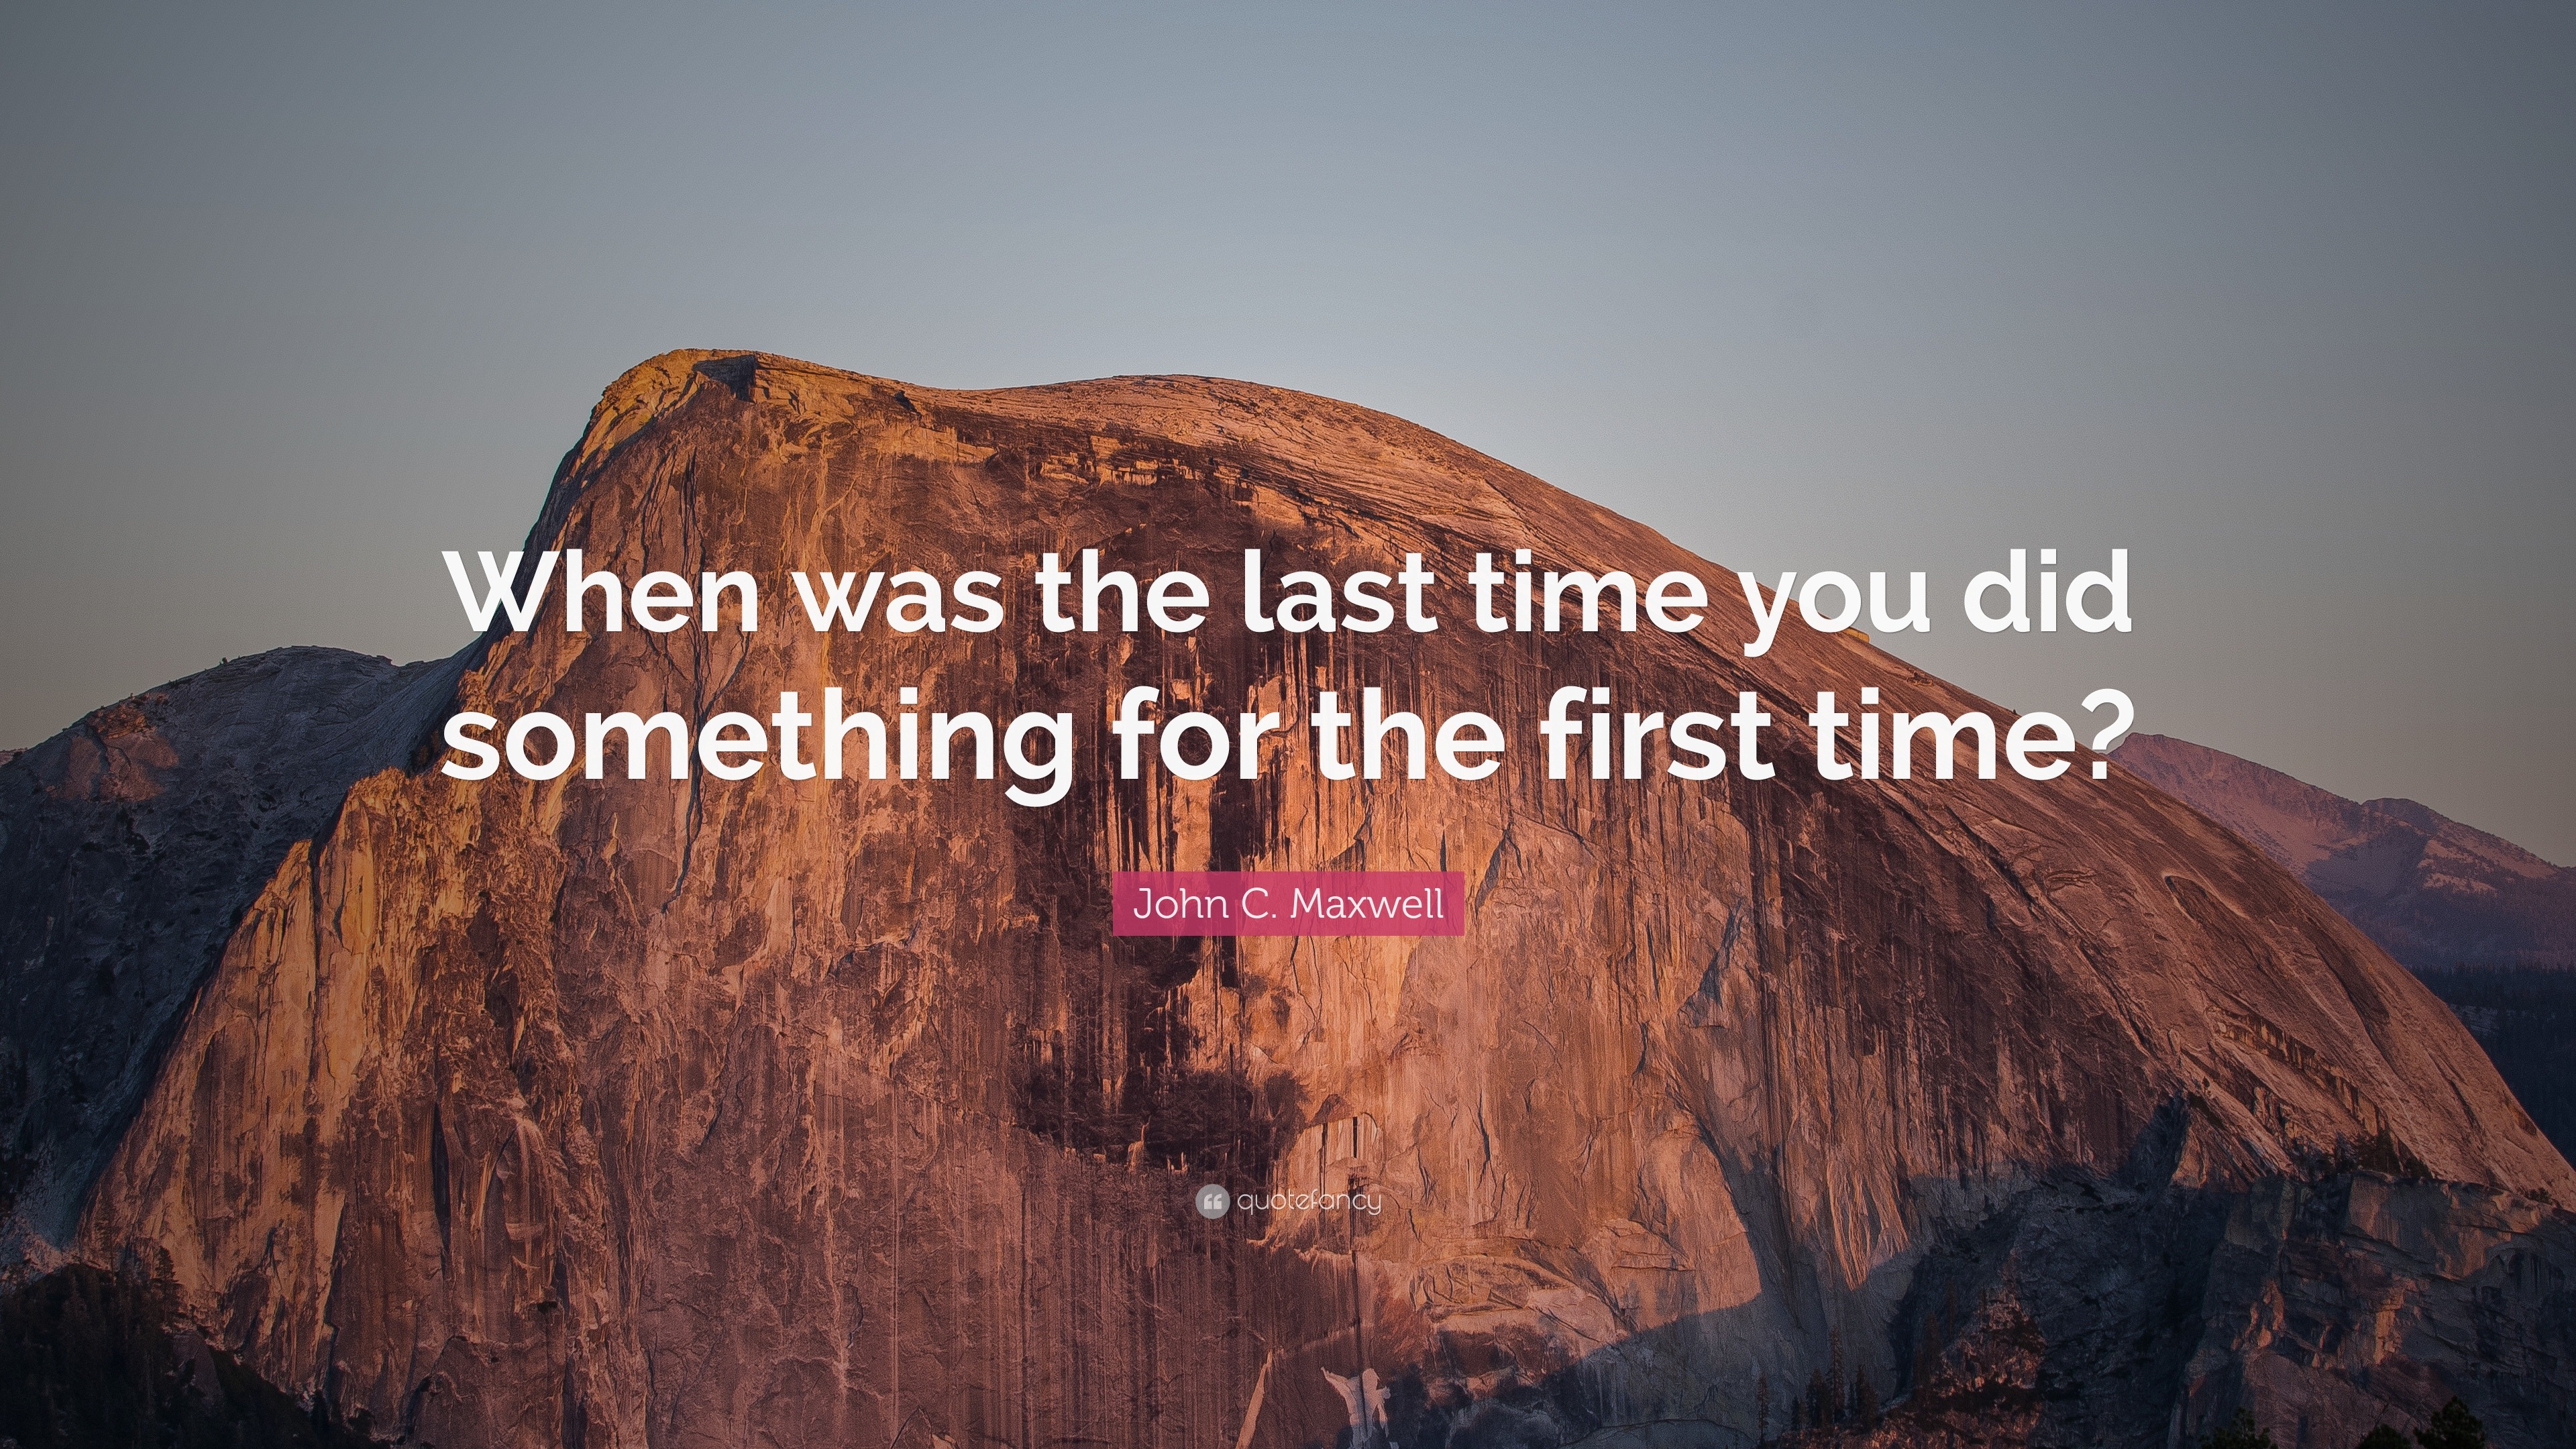 John C. Maxwell Quote: “When was the last time you did something for the first  time?”